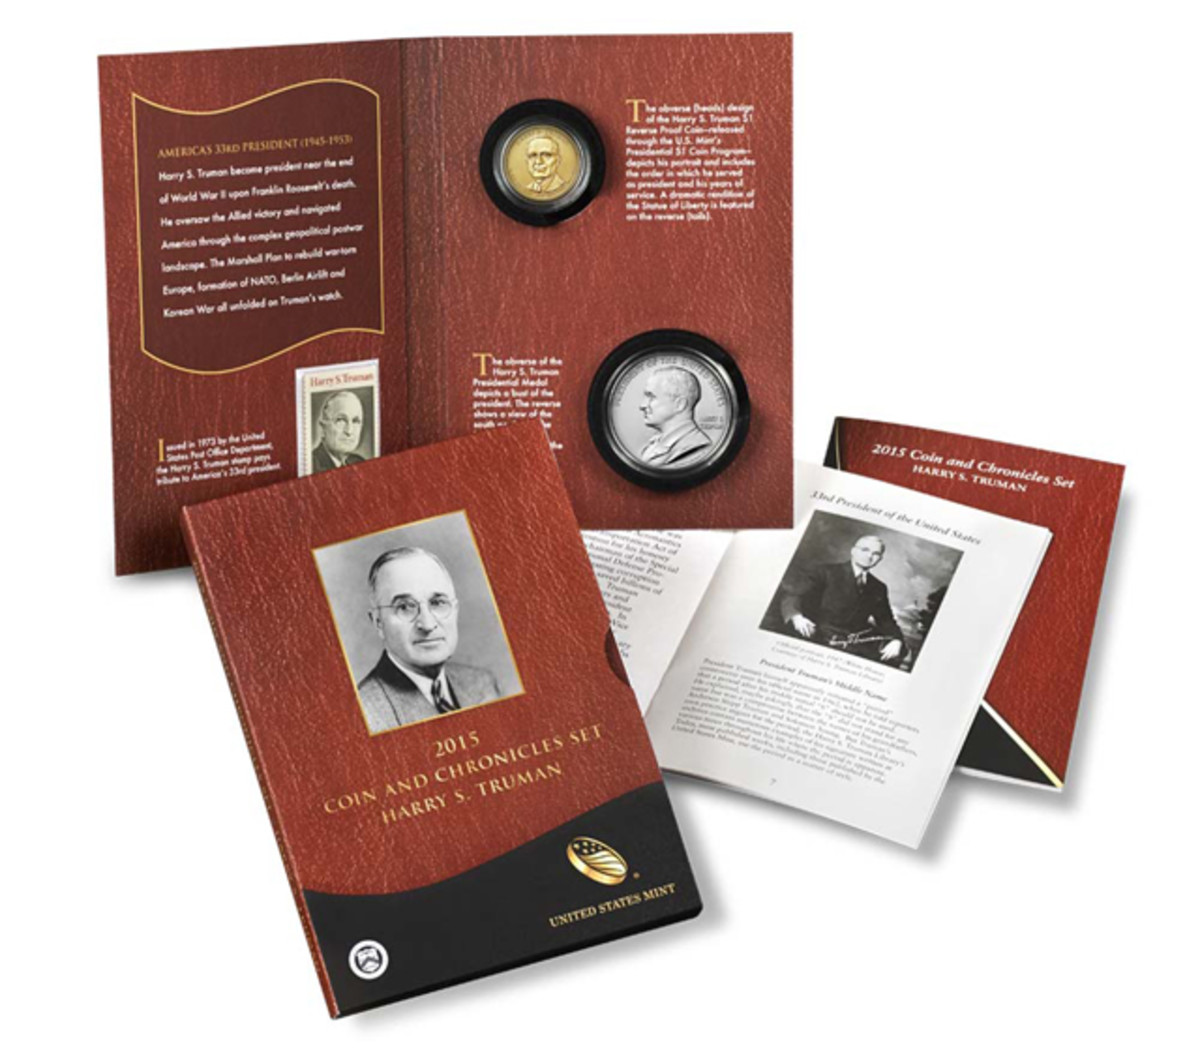 Experiences vary for those ordering the Truman Coin and Chronicles set.